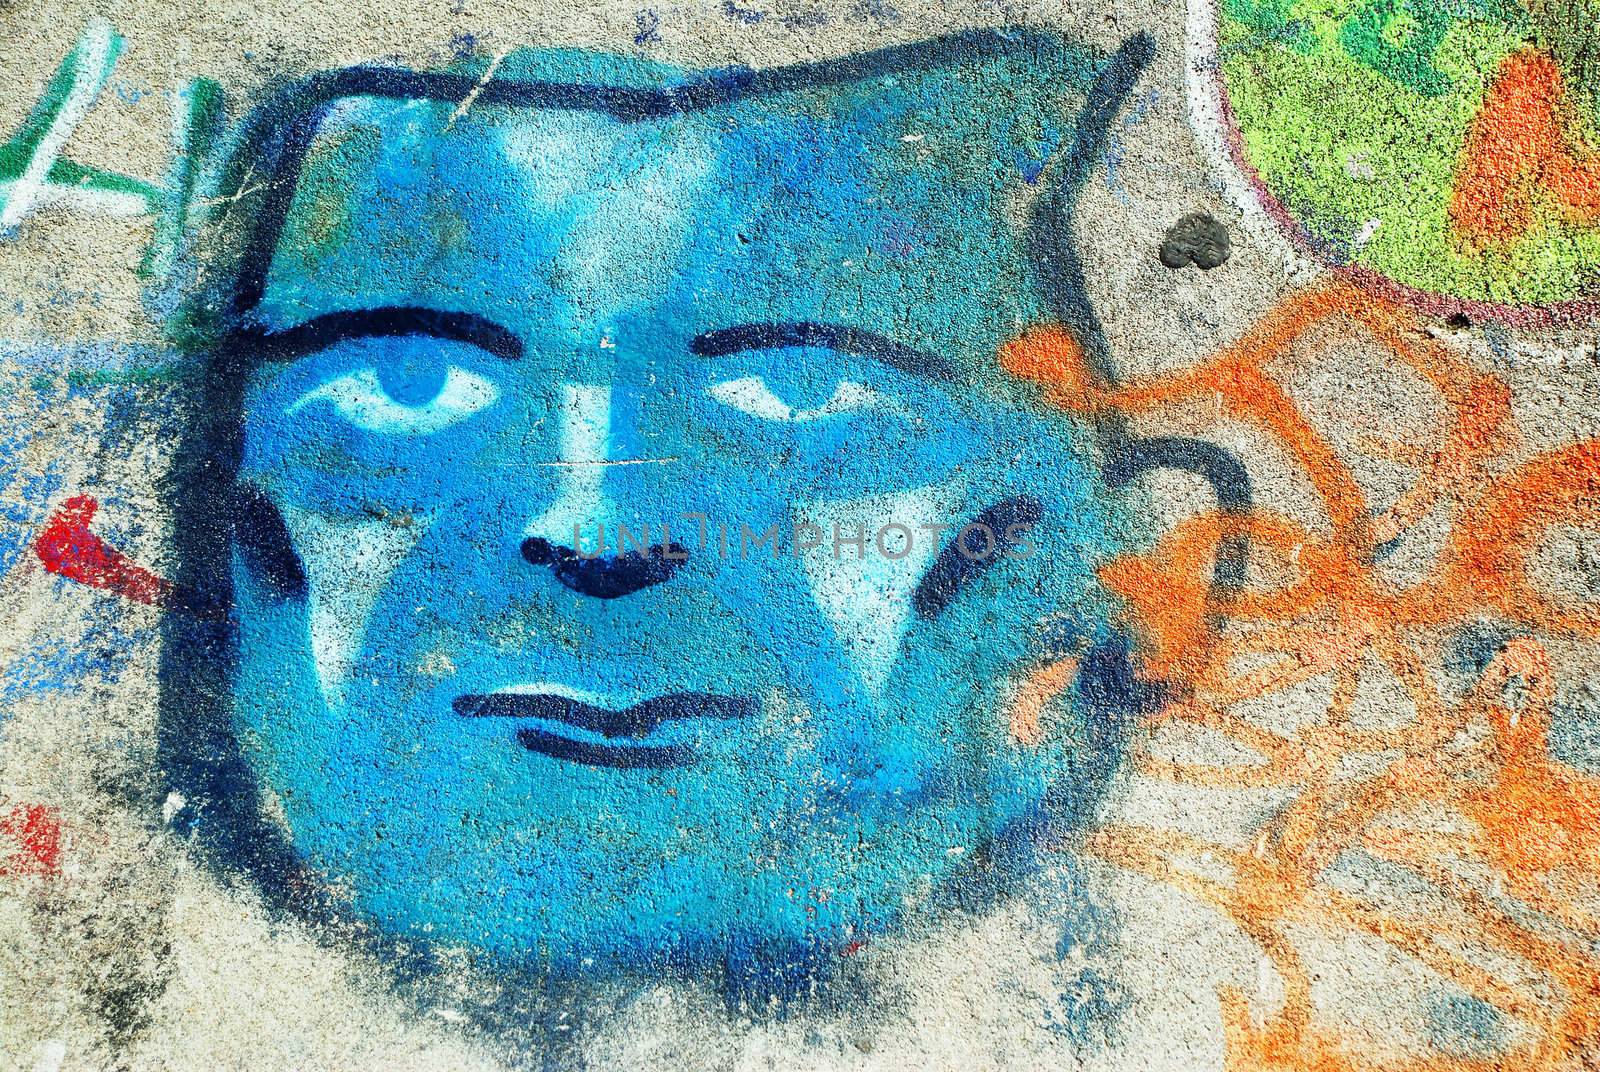 A photograph of a spray painted graffiti face